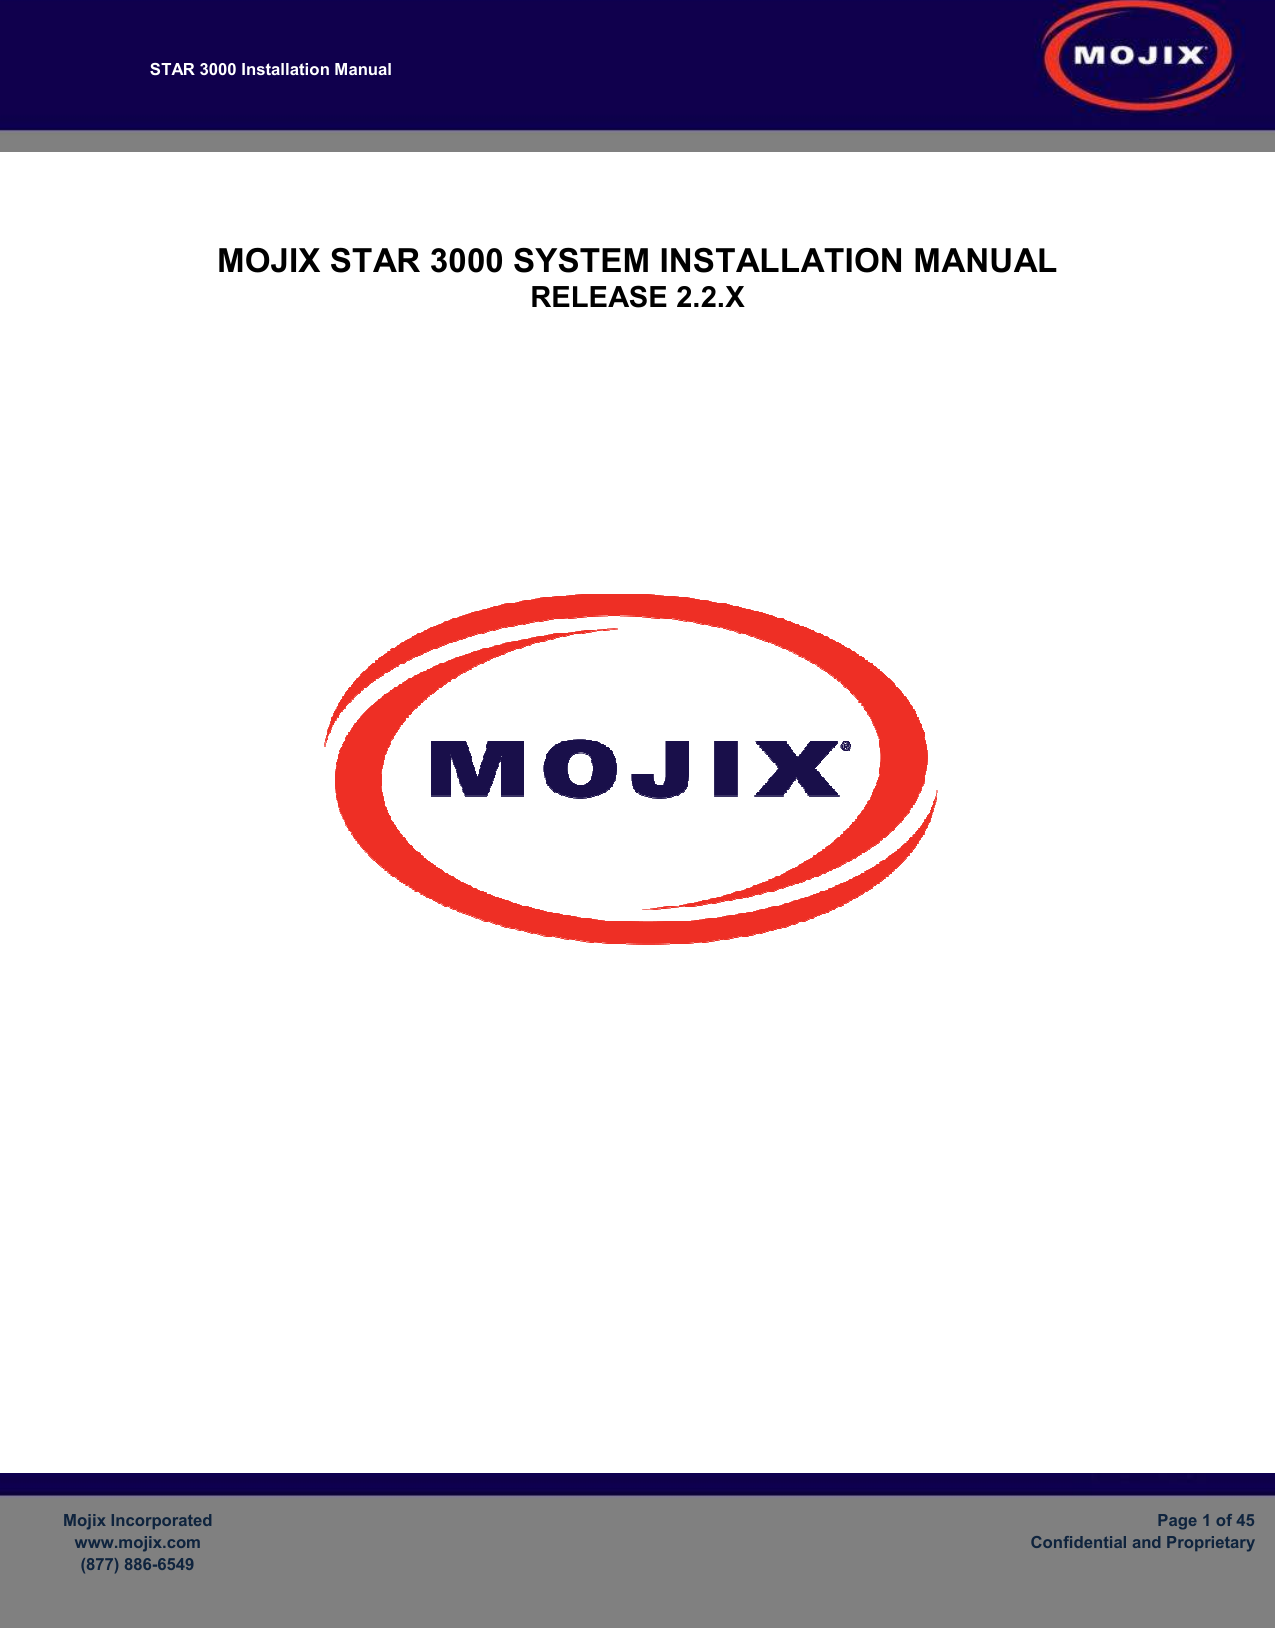 STAR 3000 Installation Manual         Mojix Incorporated www.mojix.com (877) 886-6549  Page 1 of 45 Confidential and Proprietary    MOJIX STAR 3000 SYSTEM INSTALLATION MANUAL RELEASE 2.2.X          